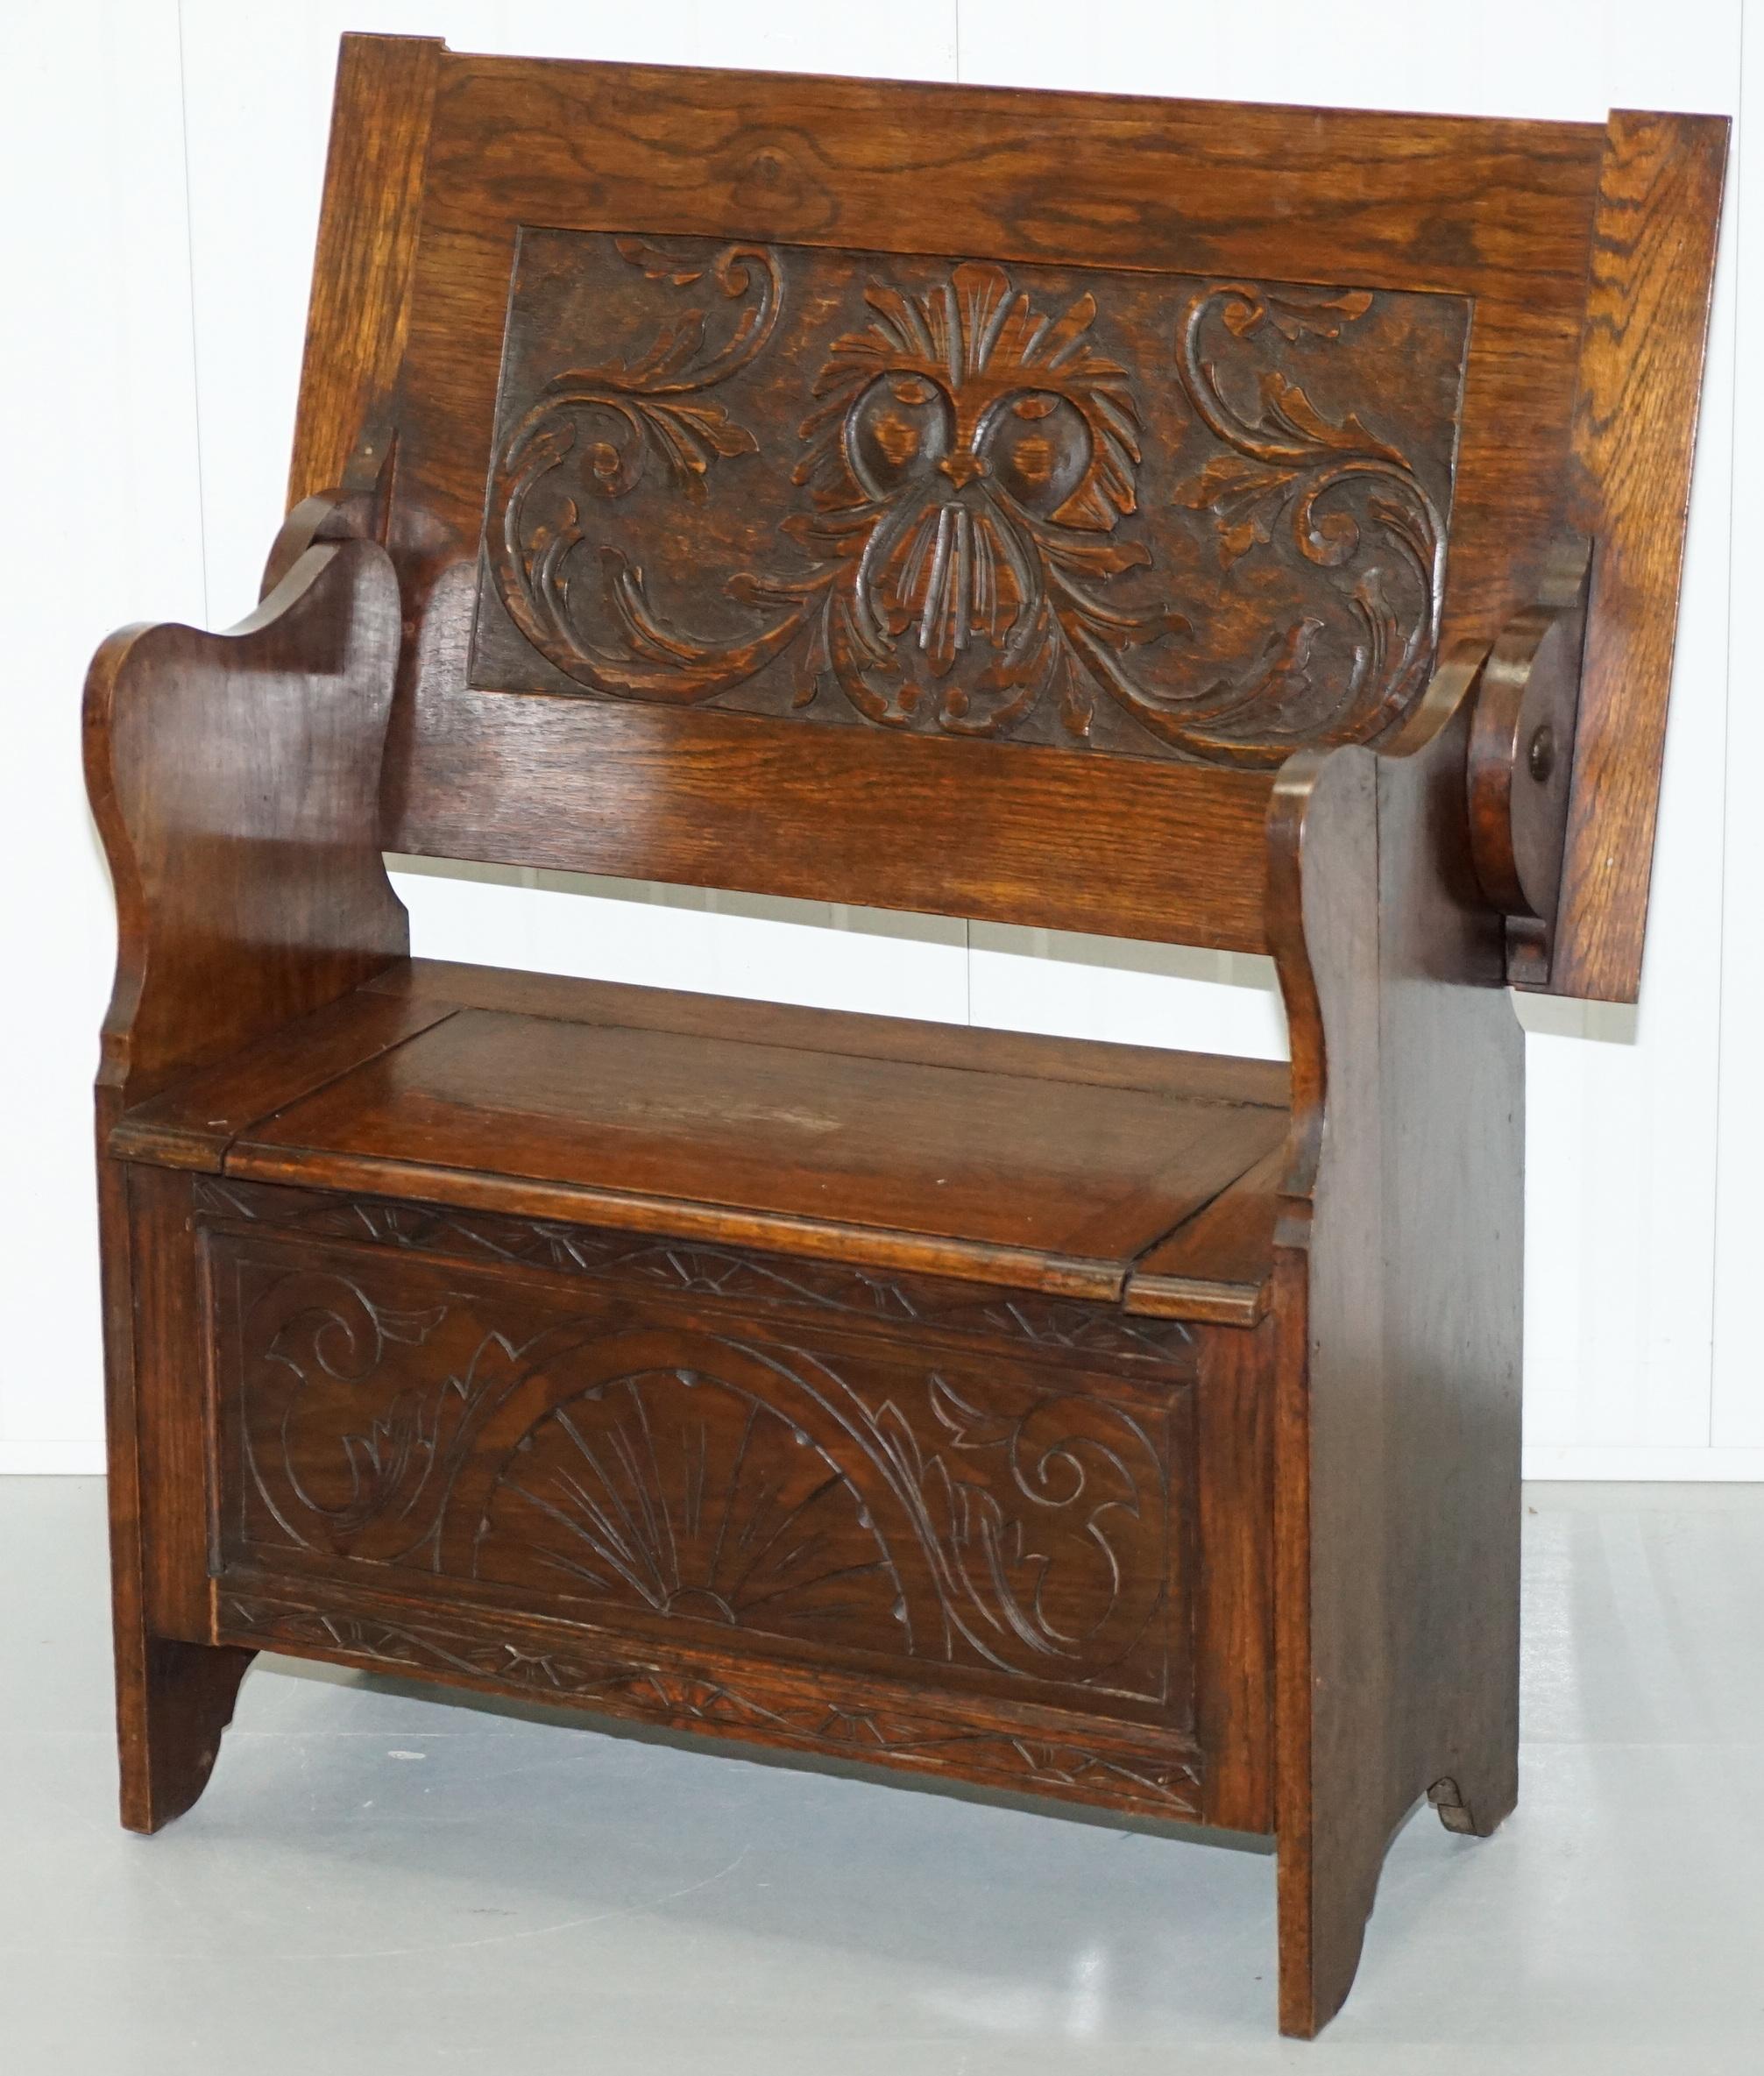 19th Century Rare Metamorphic Solid English Oak Monks Bench with Tilt-Top Table and Storage